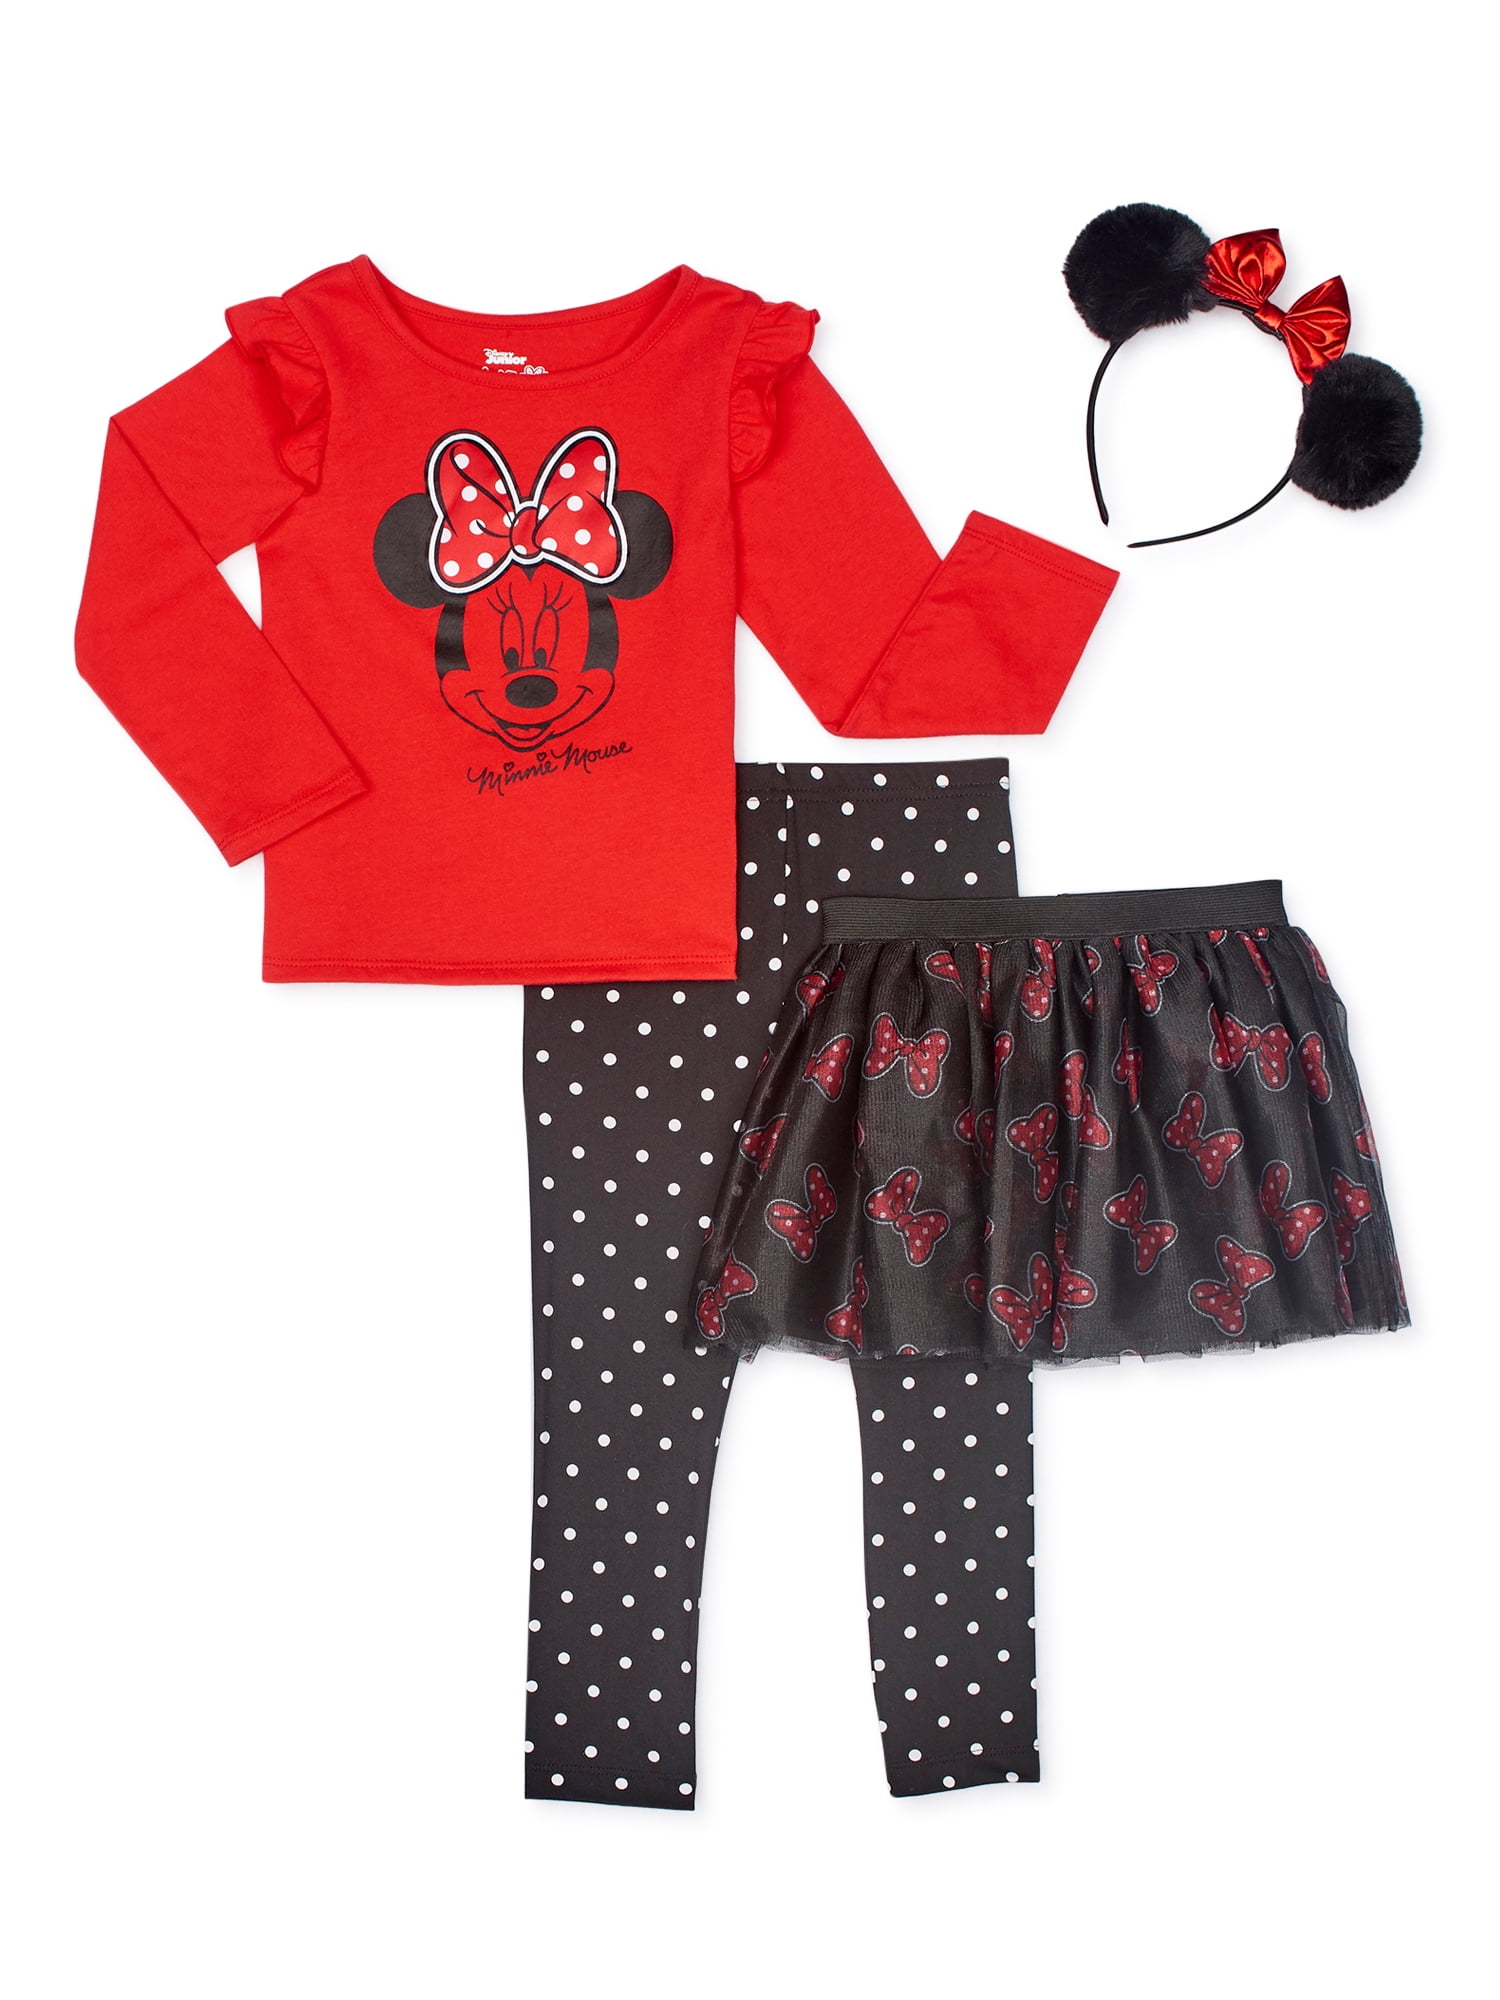 Disney Minnie Mouse Baby Girls Outfit Clothes Set Party Top Leggings 9-36 Months 